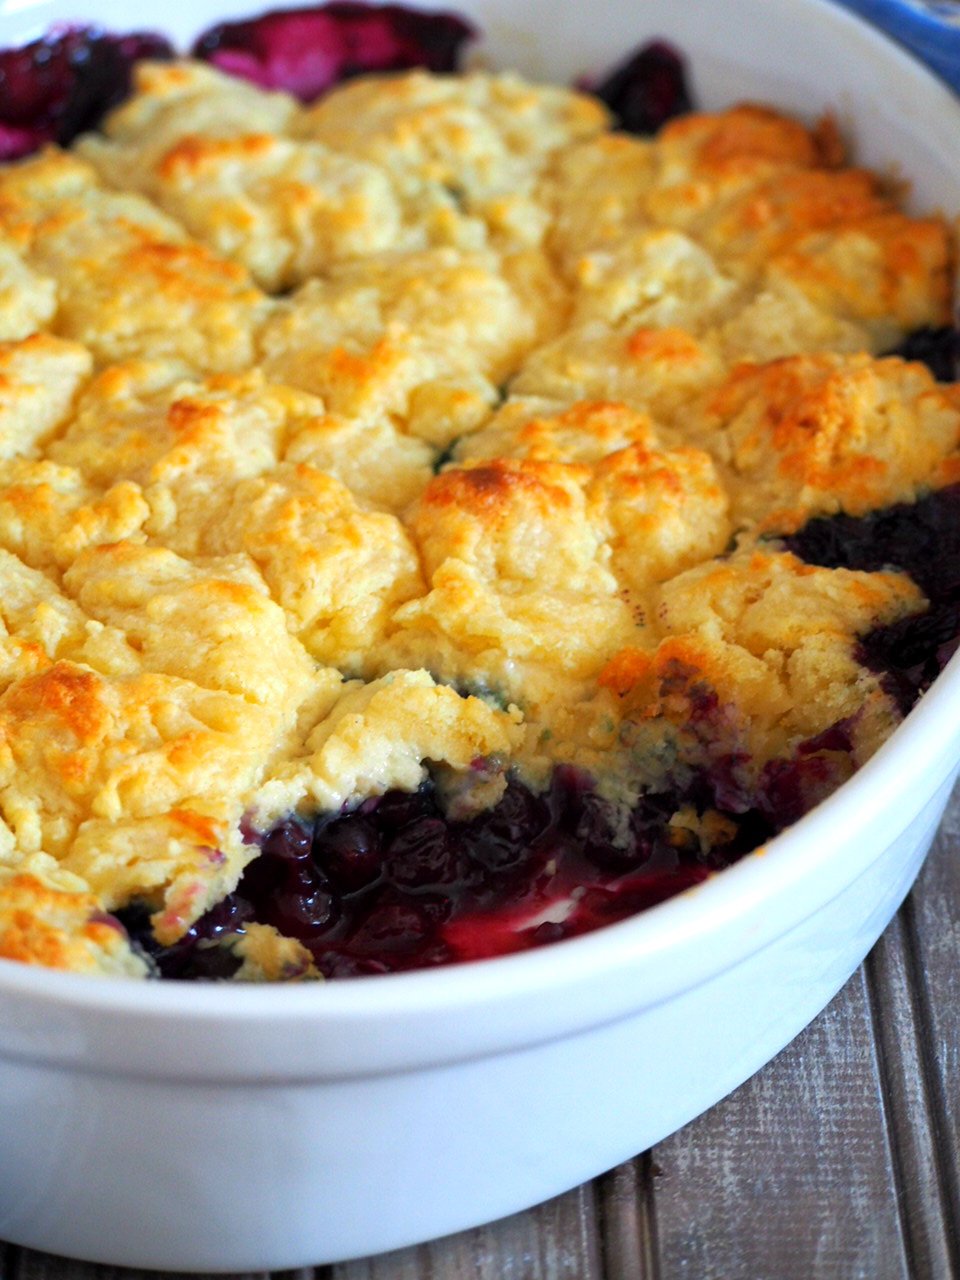 Blueberry cobbler with a scooped part on the front side.